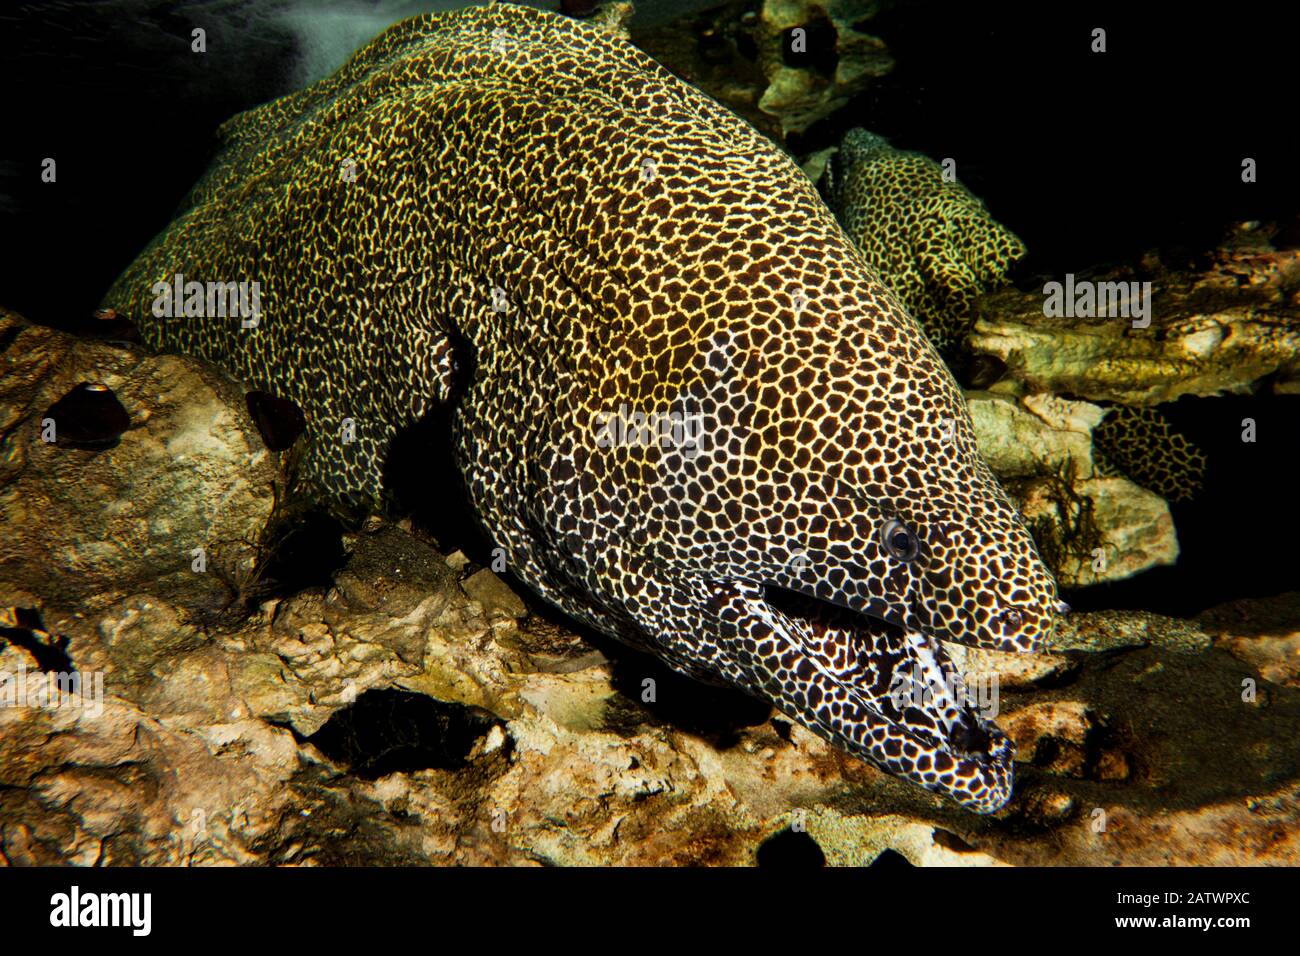 Honeycomb Moray Eel, gymnothorax favagineus, Adult with Open Mouth, South Africa Stock Photo